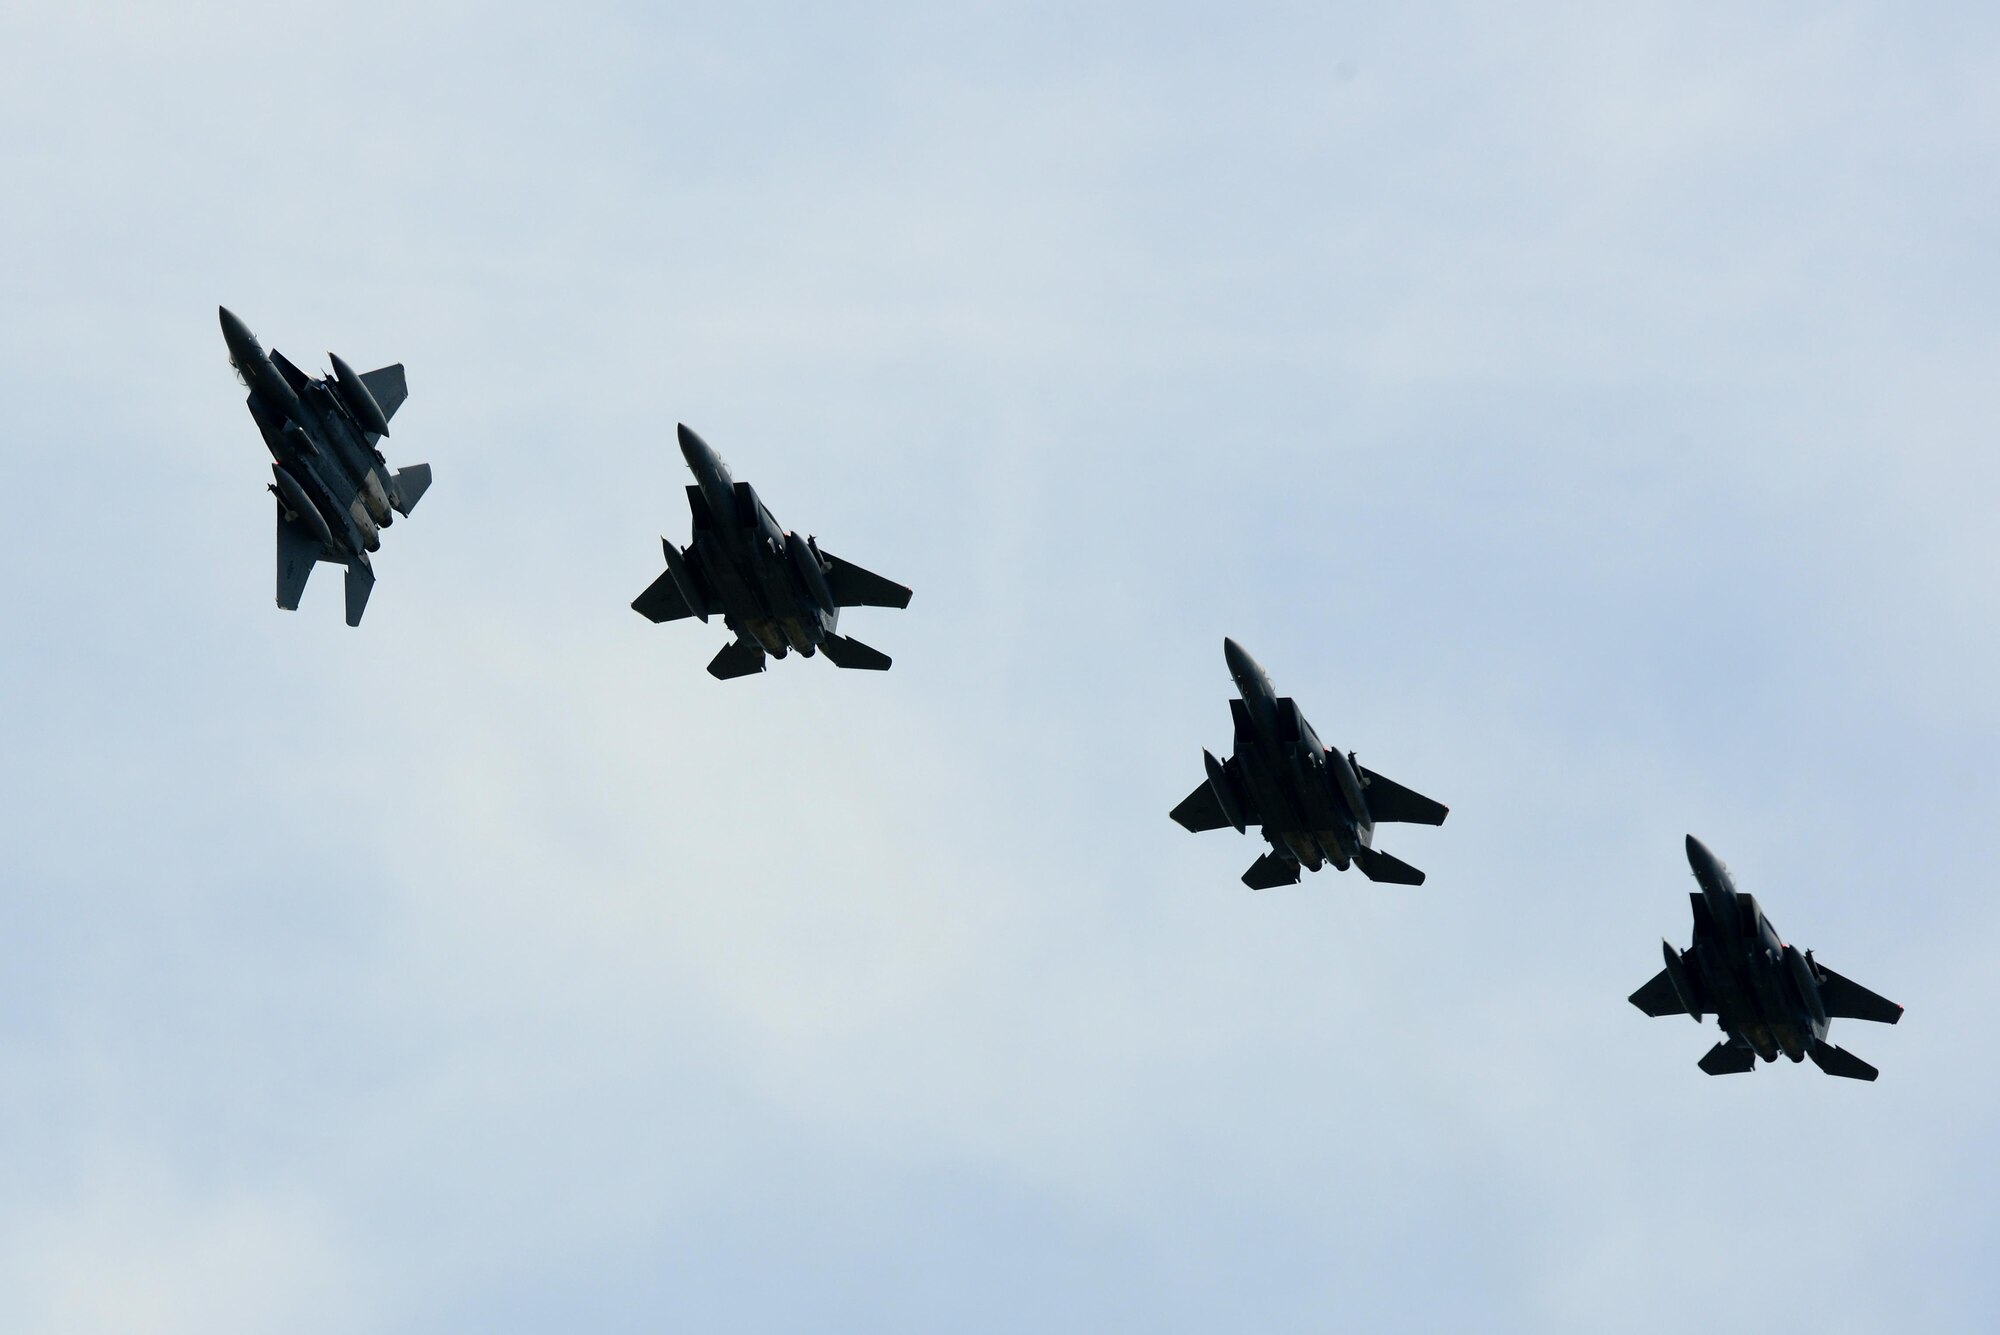 A group of U.S. Air Force F-15 Strike Eagles prepare to land at Langley Air Force Base, Va., following a 95th Anniversary Maj. Gen. William “Billy” Mitchell memorial reenactment, July 22, 2016. Pilots flying 8 different airframes dropped inert munitions at the original site of the 1921 airpower trials of the coast of the Virginian Capes, where the sunken Ostfriesland still lies. (U.S. Air Force photo by Staff Sgt. R. Alex Durbin)